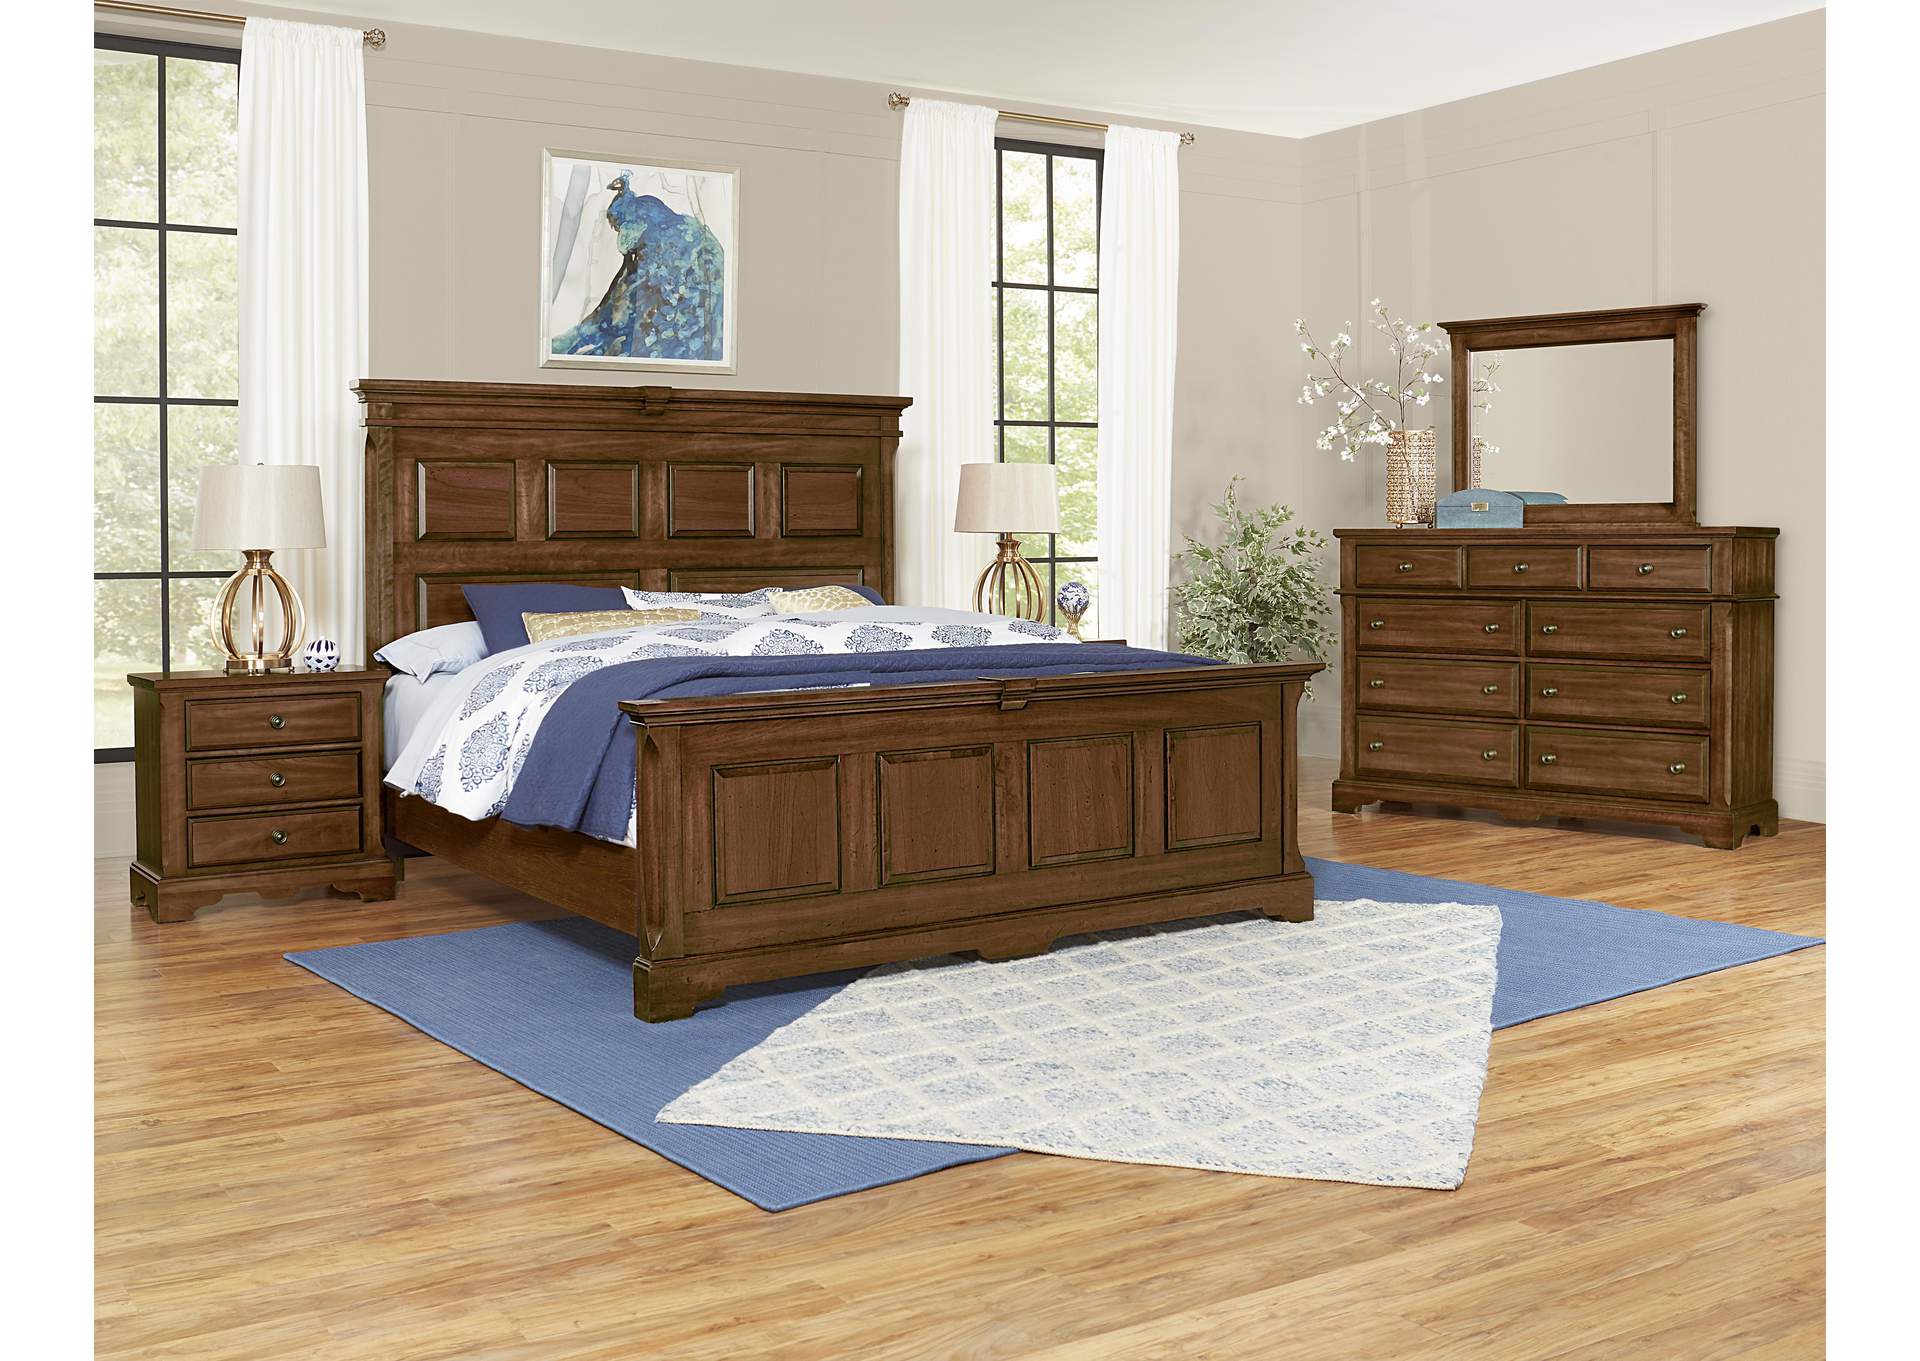 Heritage-Amish Cherry Queen Mansion Bed,Vaughan-Bassett